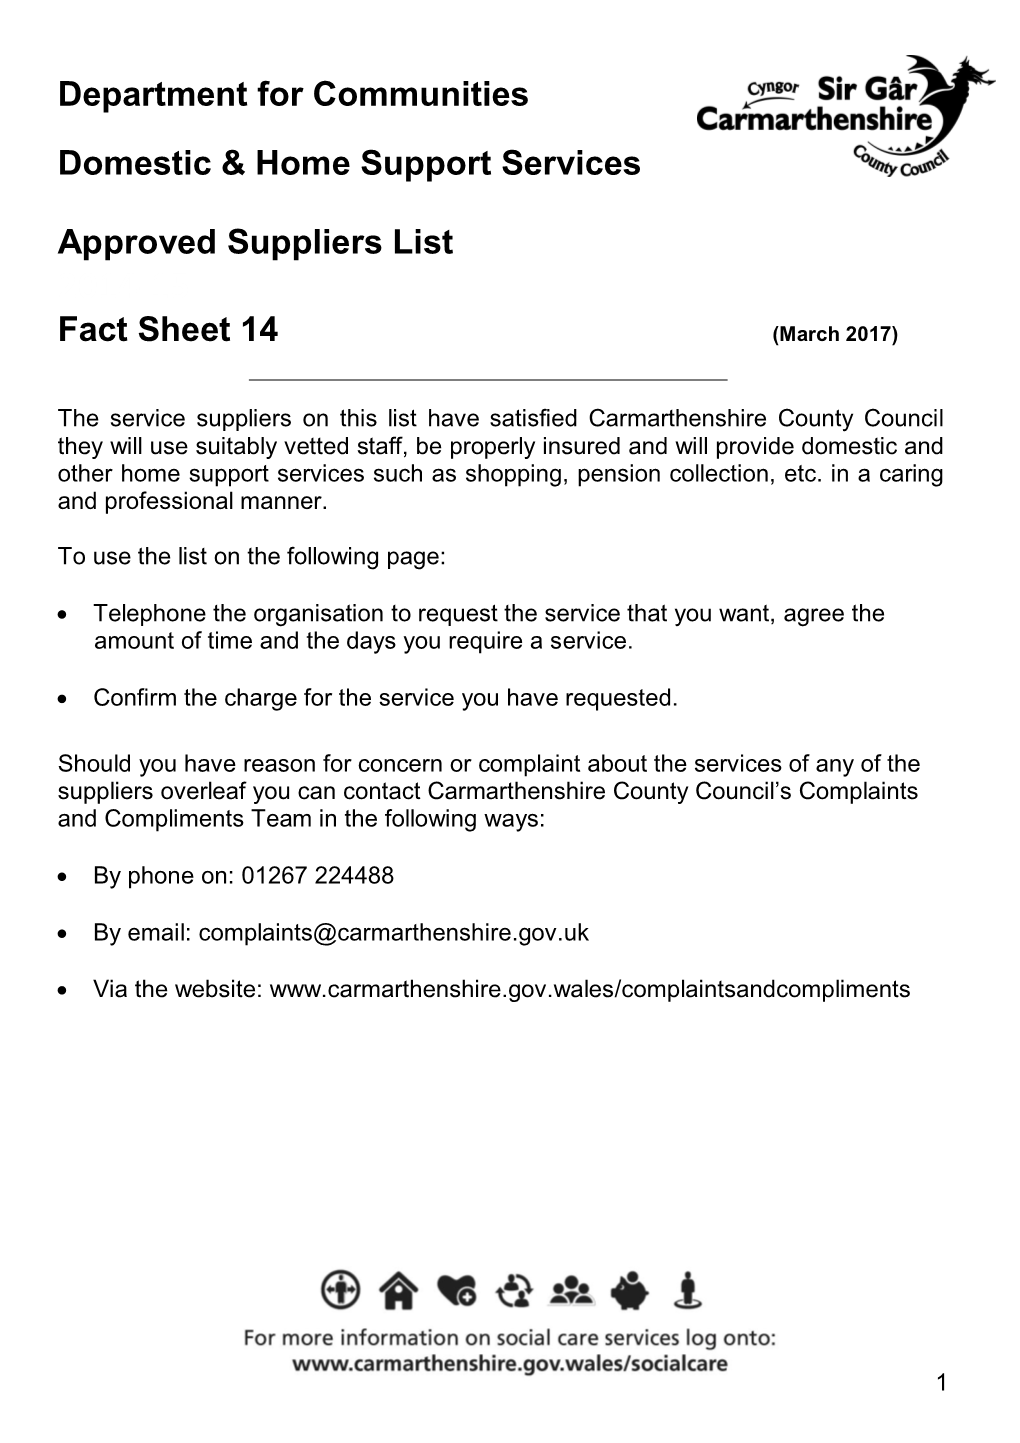 Approved Suppliers List 2014-15 Fact Sheet 14 (March 2017)